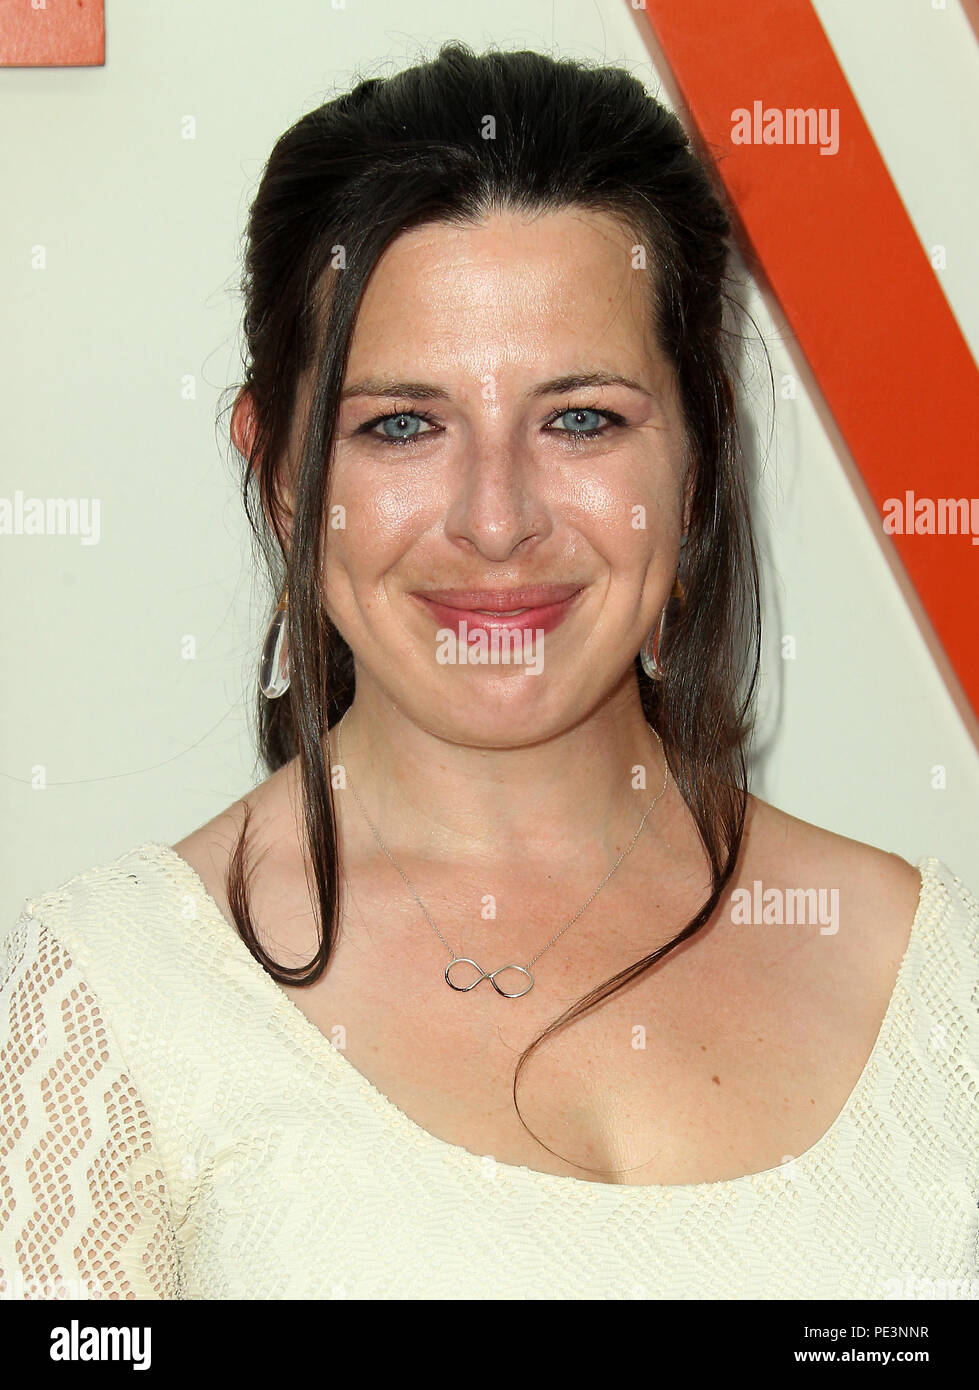 “Don’t Worry He Won’t Get Far On Foot” Premiere held at the ArcLight Hollywood Theatre in Los Angeles, California.  Featuring: Heather Matarazzo Where: Los Angeles, California, United States When: 12 Jul 2018 Credit: Adriana M. Barraza/WENN.com Stock Photo